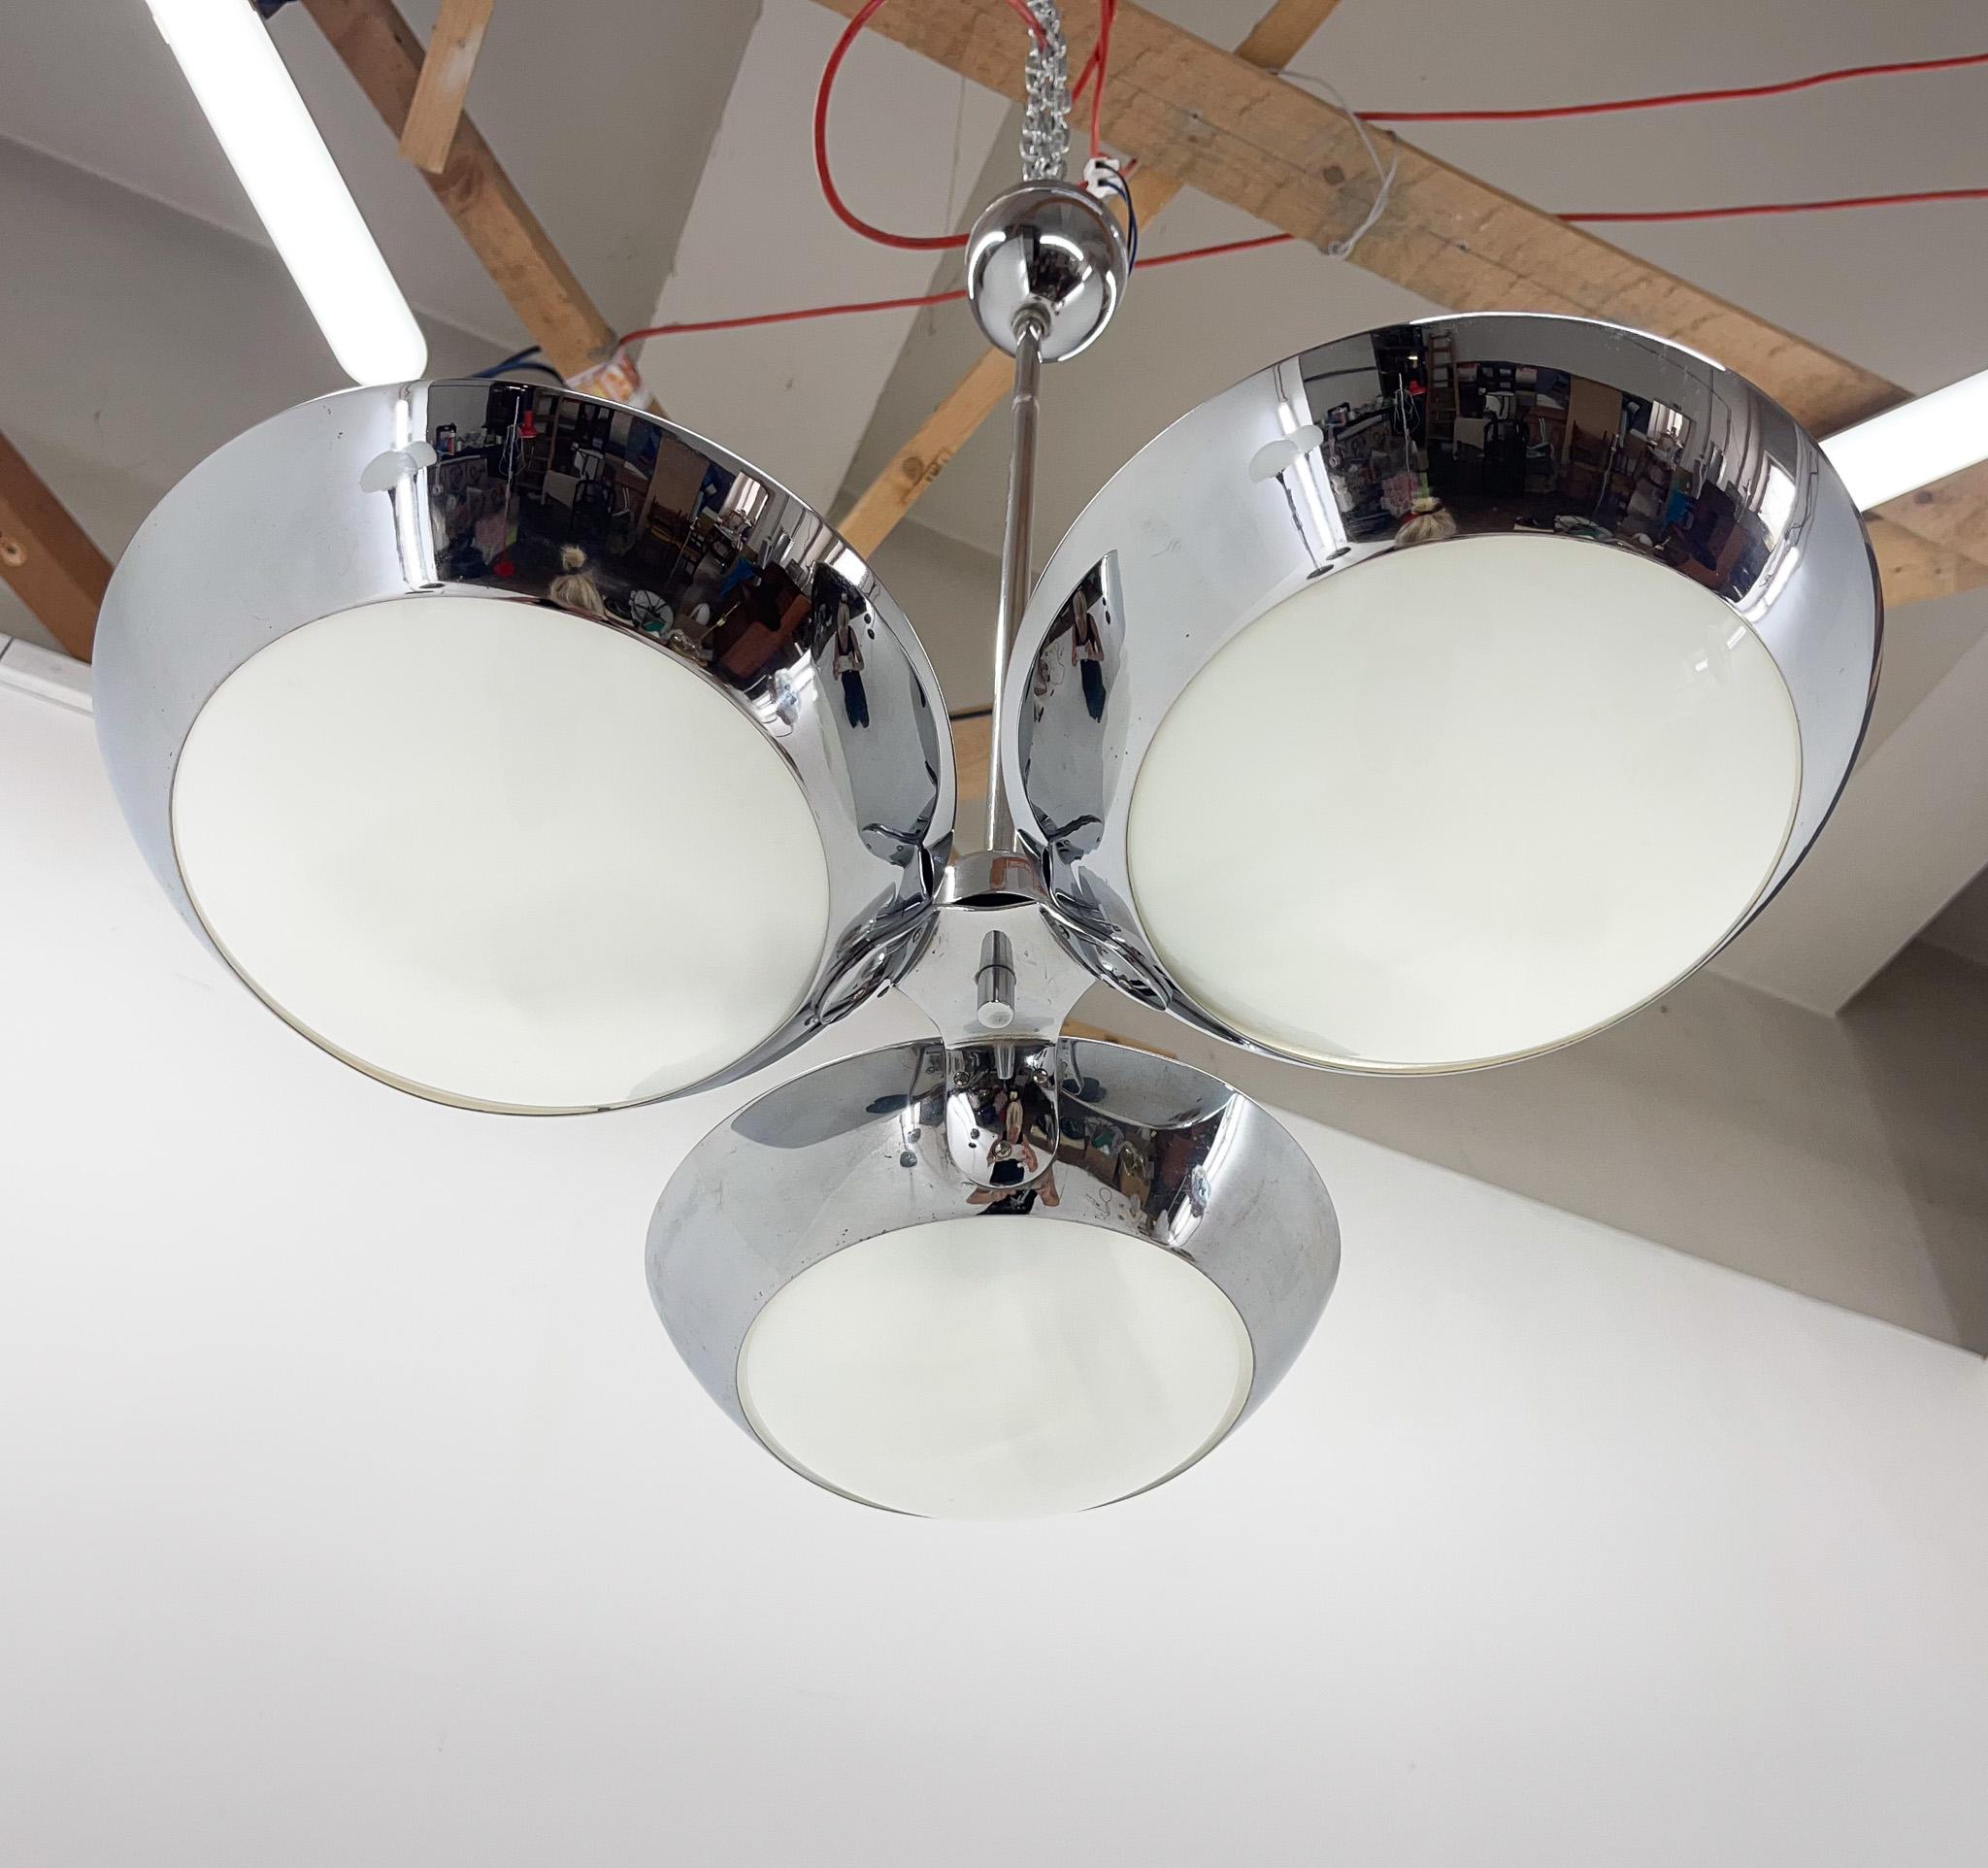 Mid-20th Century Rare Chrome-Plated Functionalist Chandelier by Zukov, 1940s For Sale